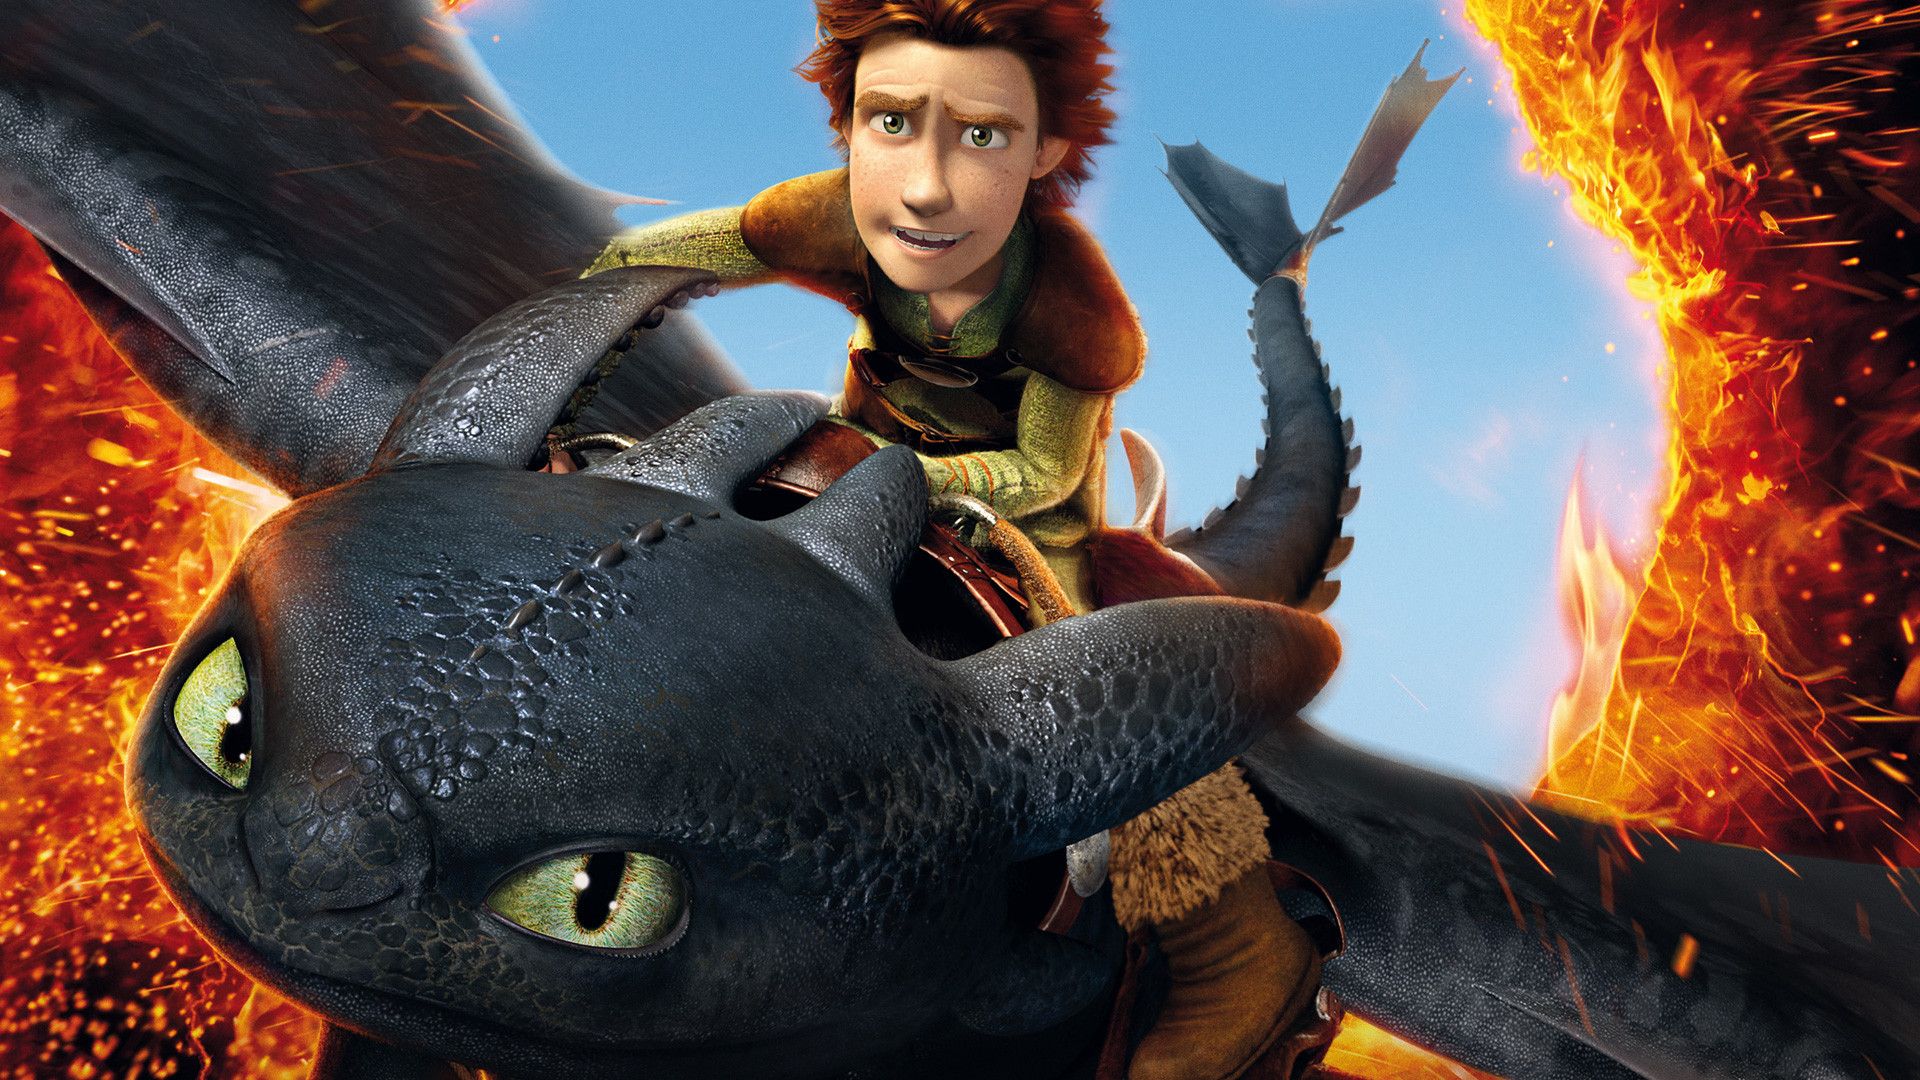 How To Train Your Dragon HD Movies, 4k Wallpaper, Image